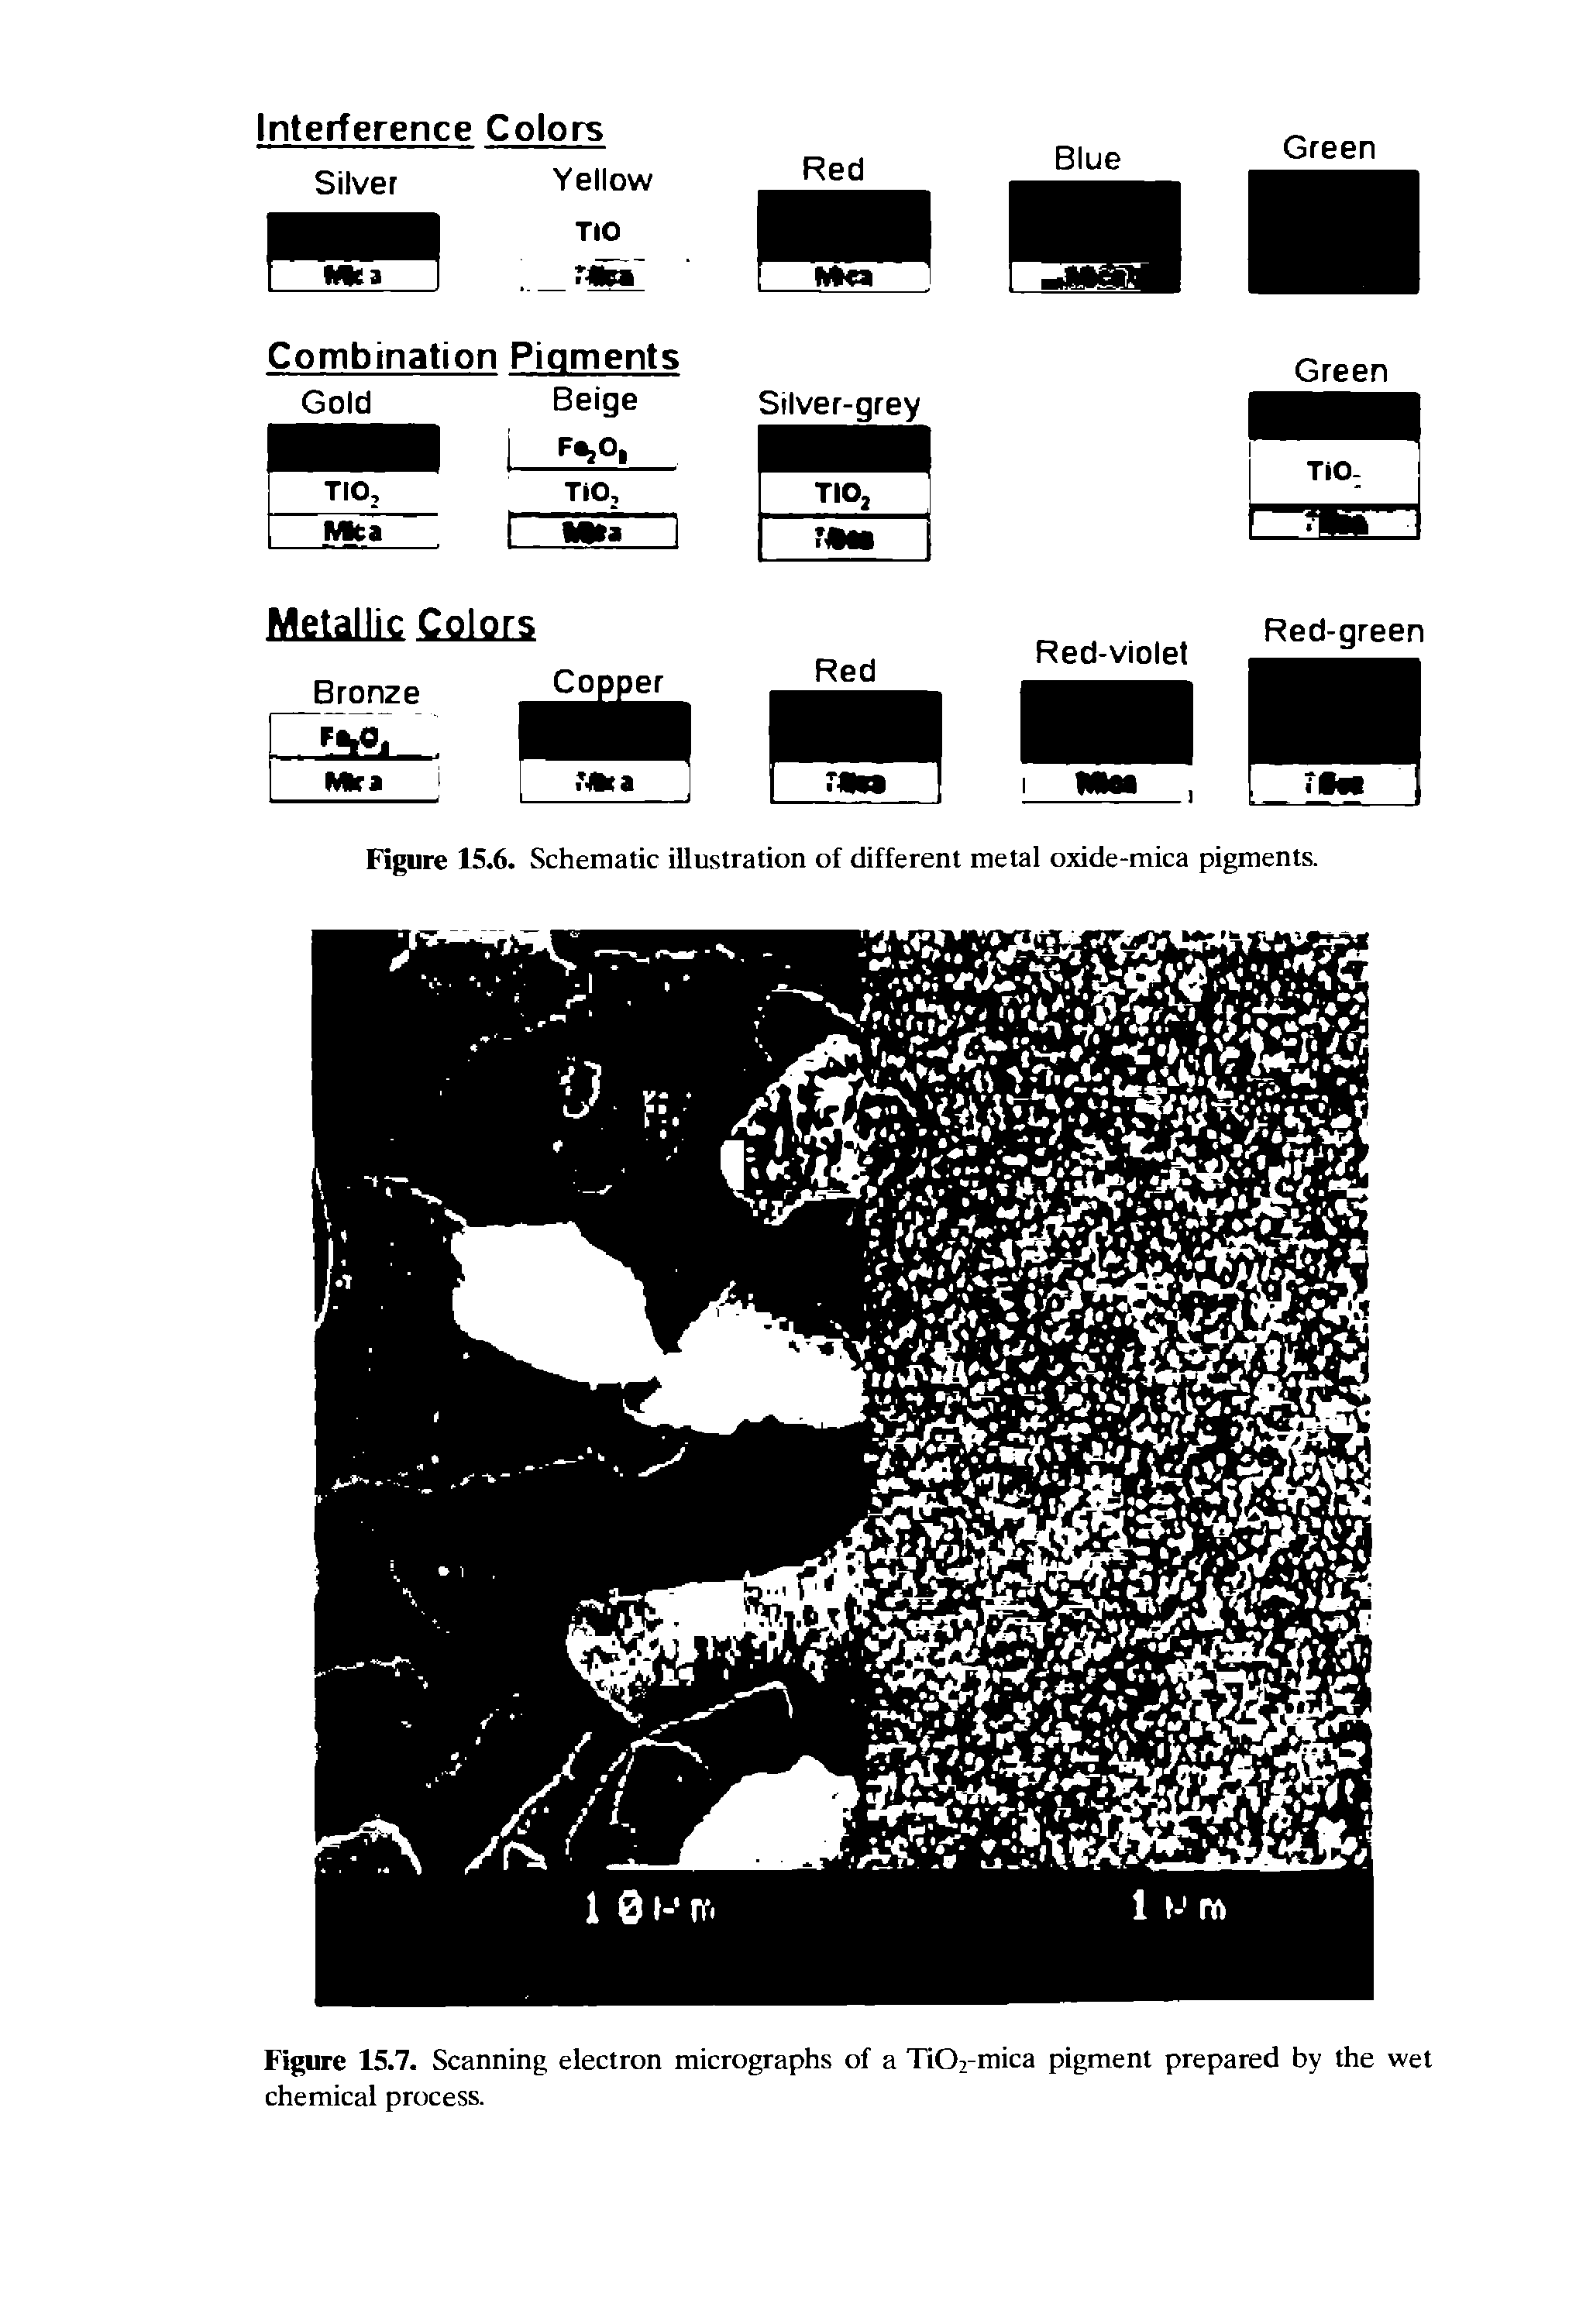 Figure 15.7. Scanning electron micrographs of a Ti02-mica pigment prepared by the wet chemical process.